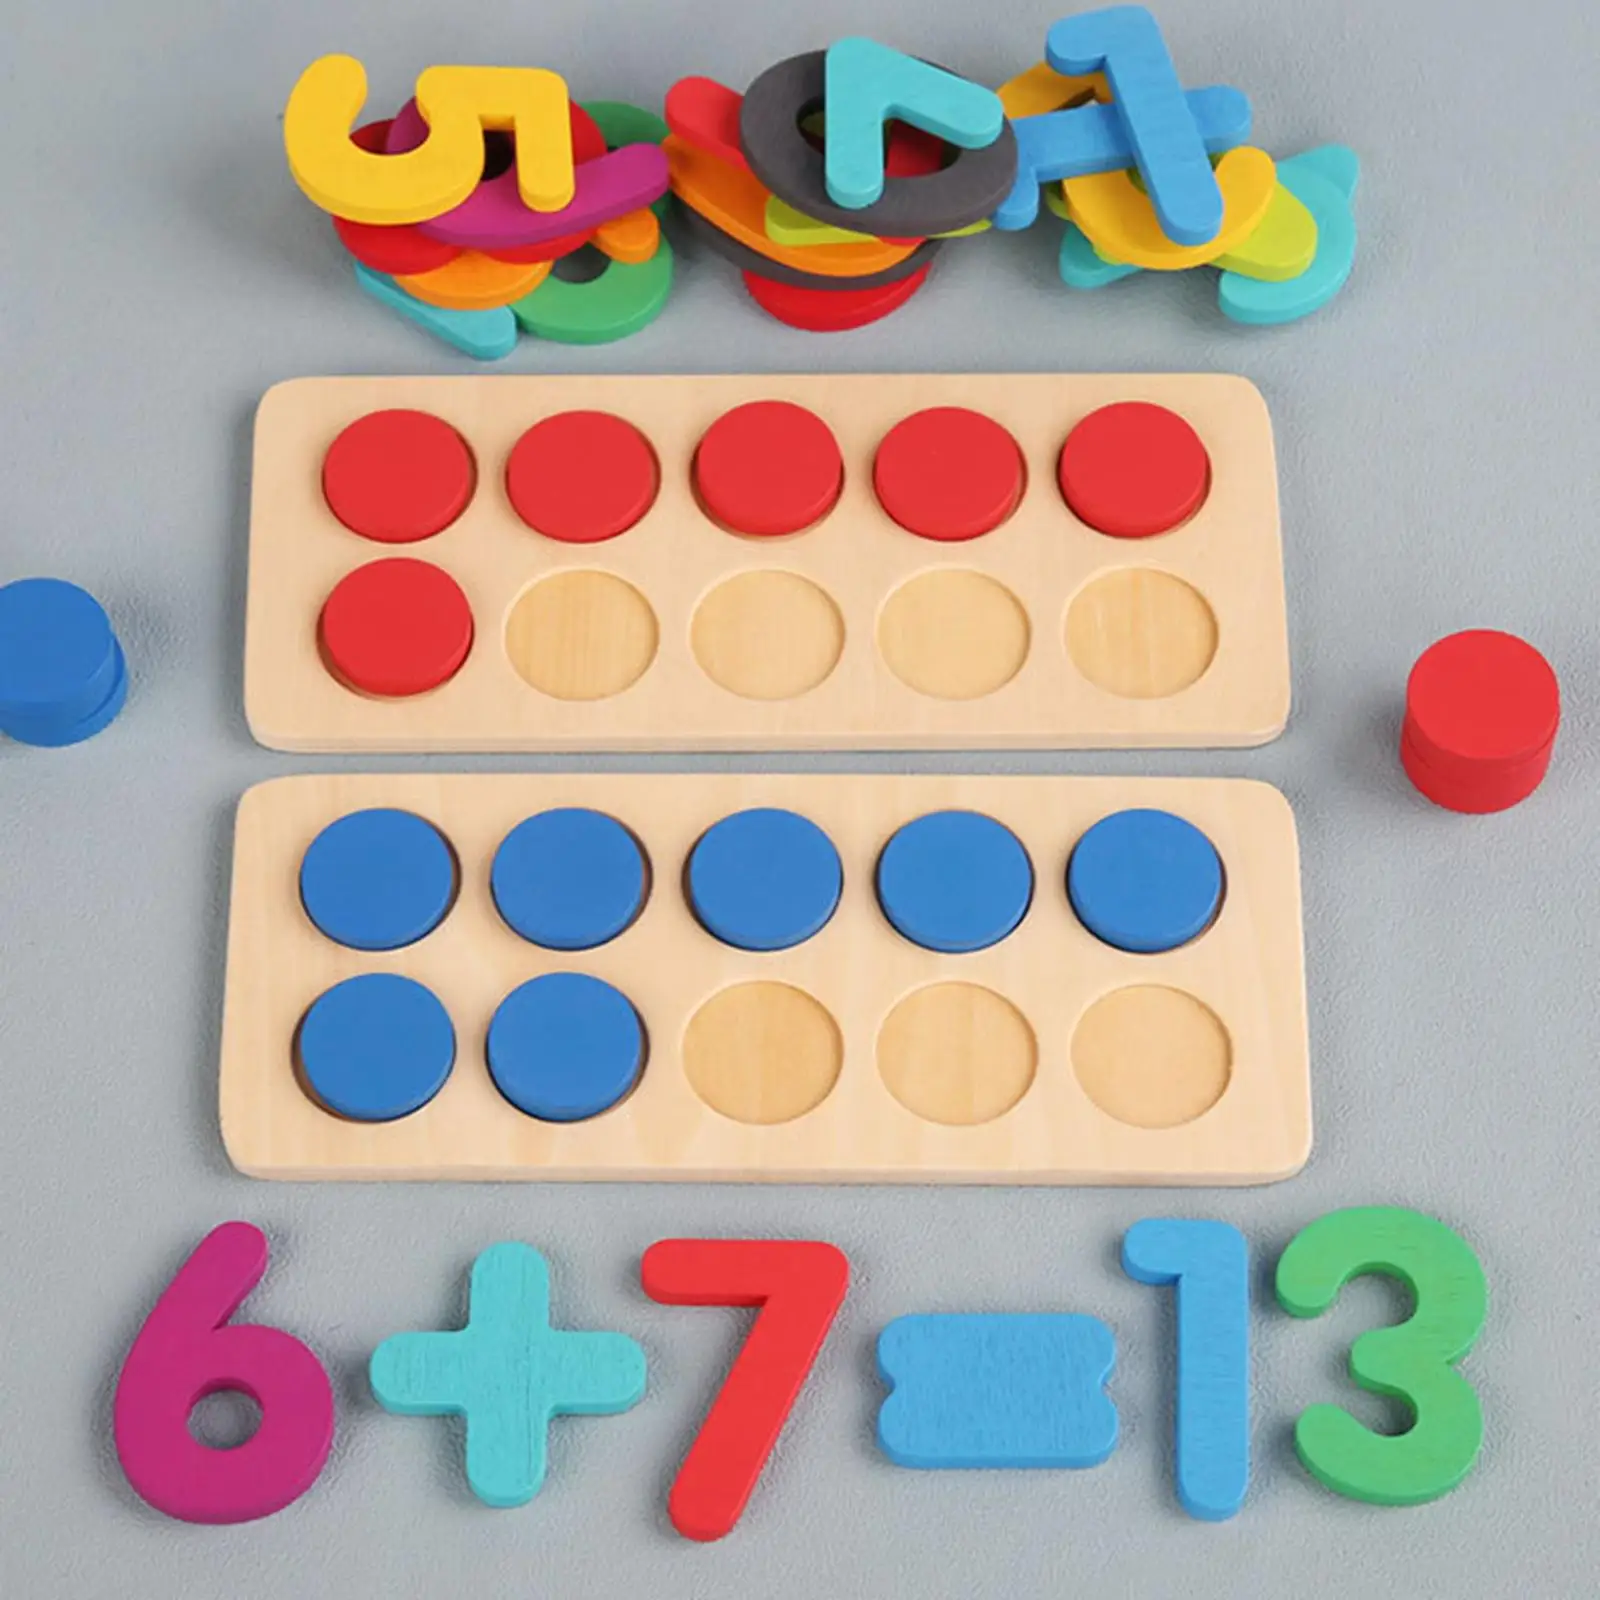 Montessori Toys Wooden Classroom Demonstration Bright Color Ten Frame Set Number Counting Games for Home Teachers Boys and Girls